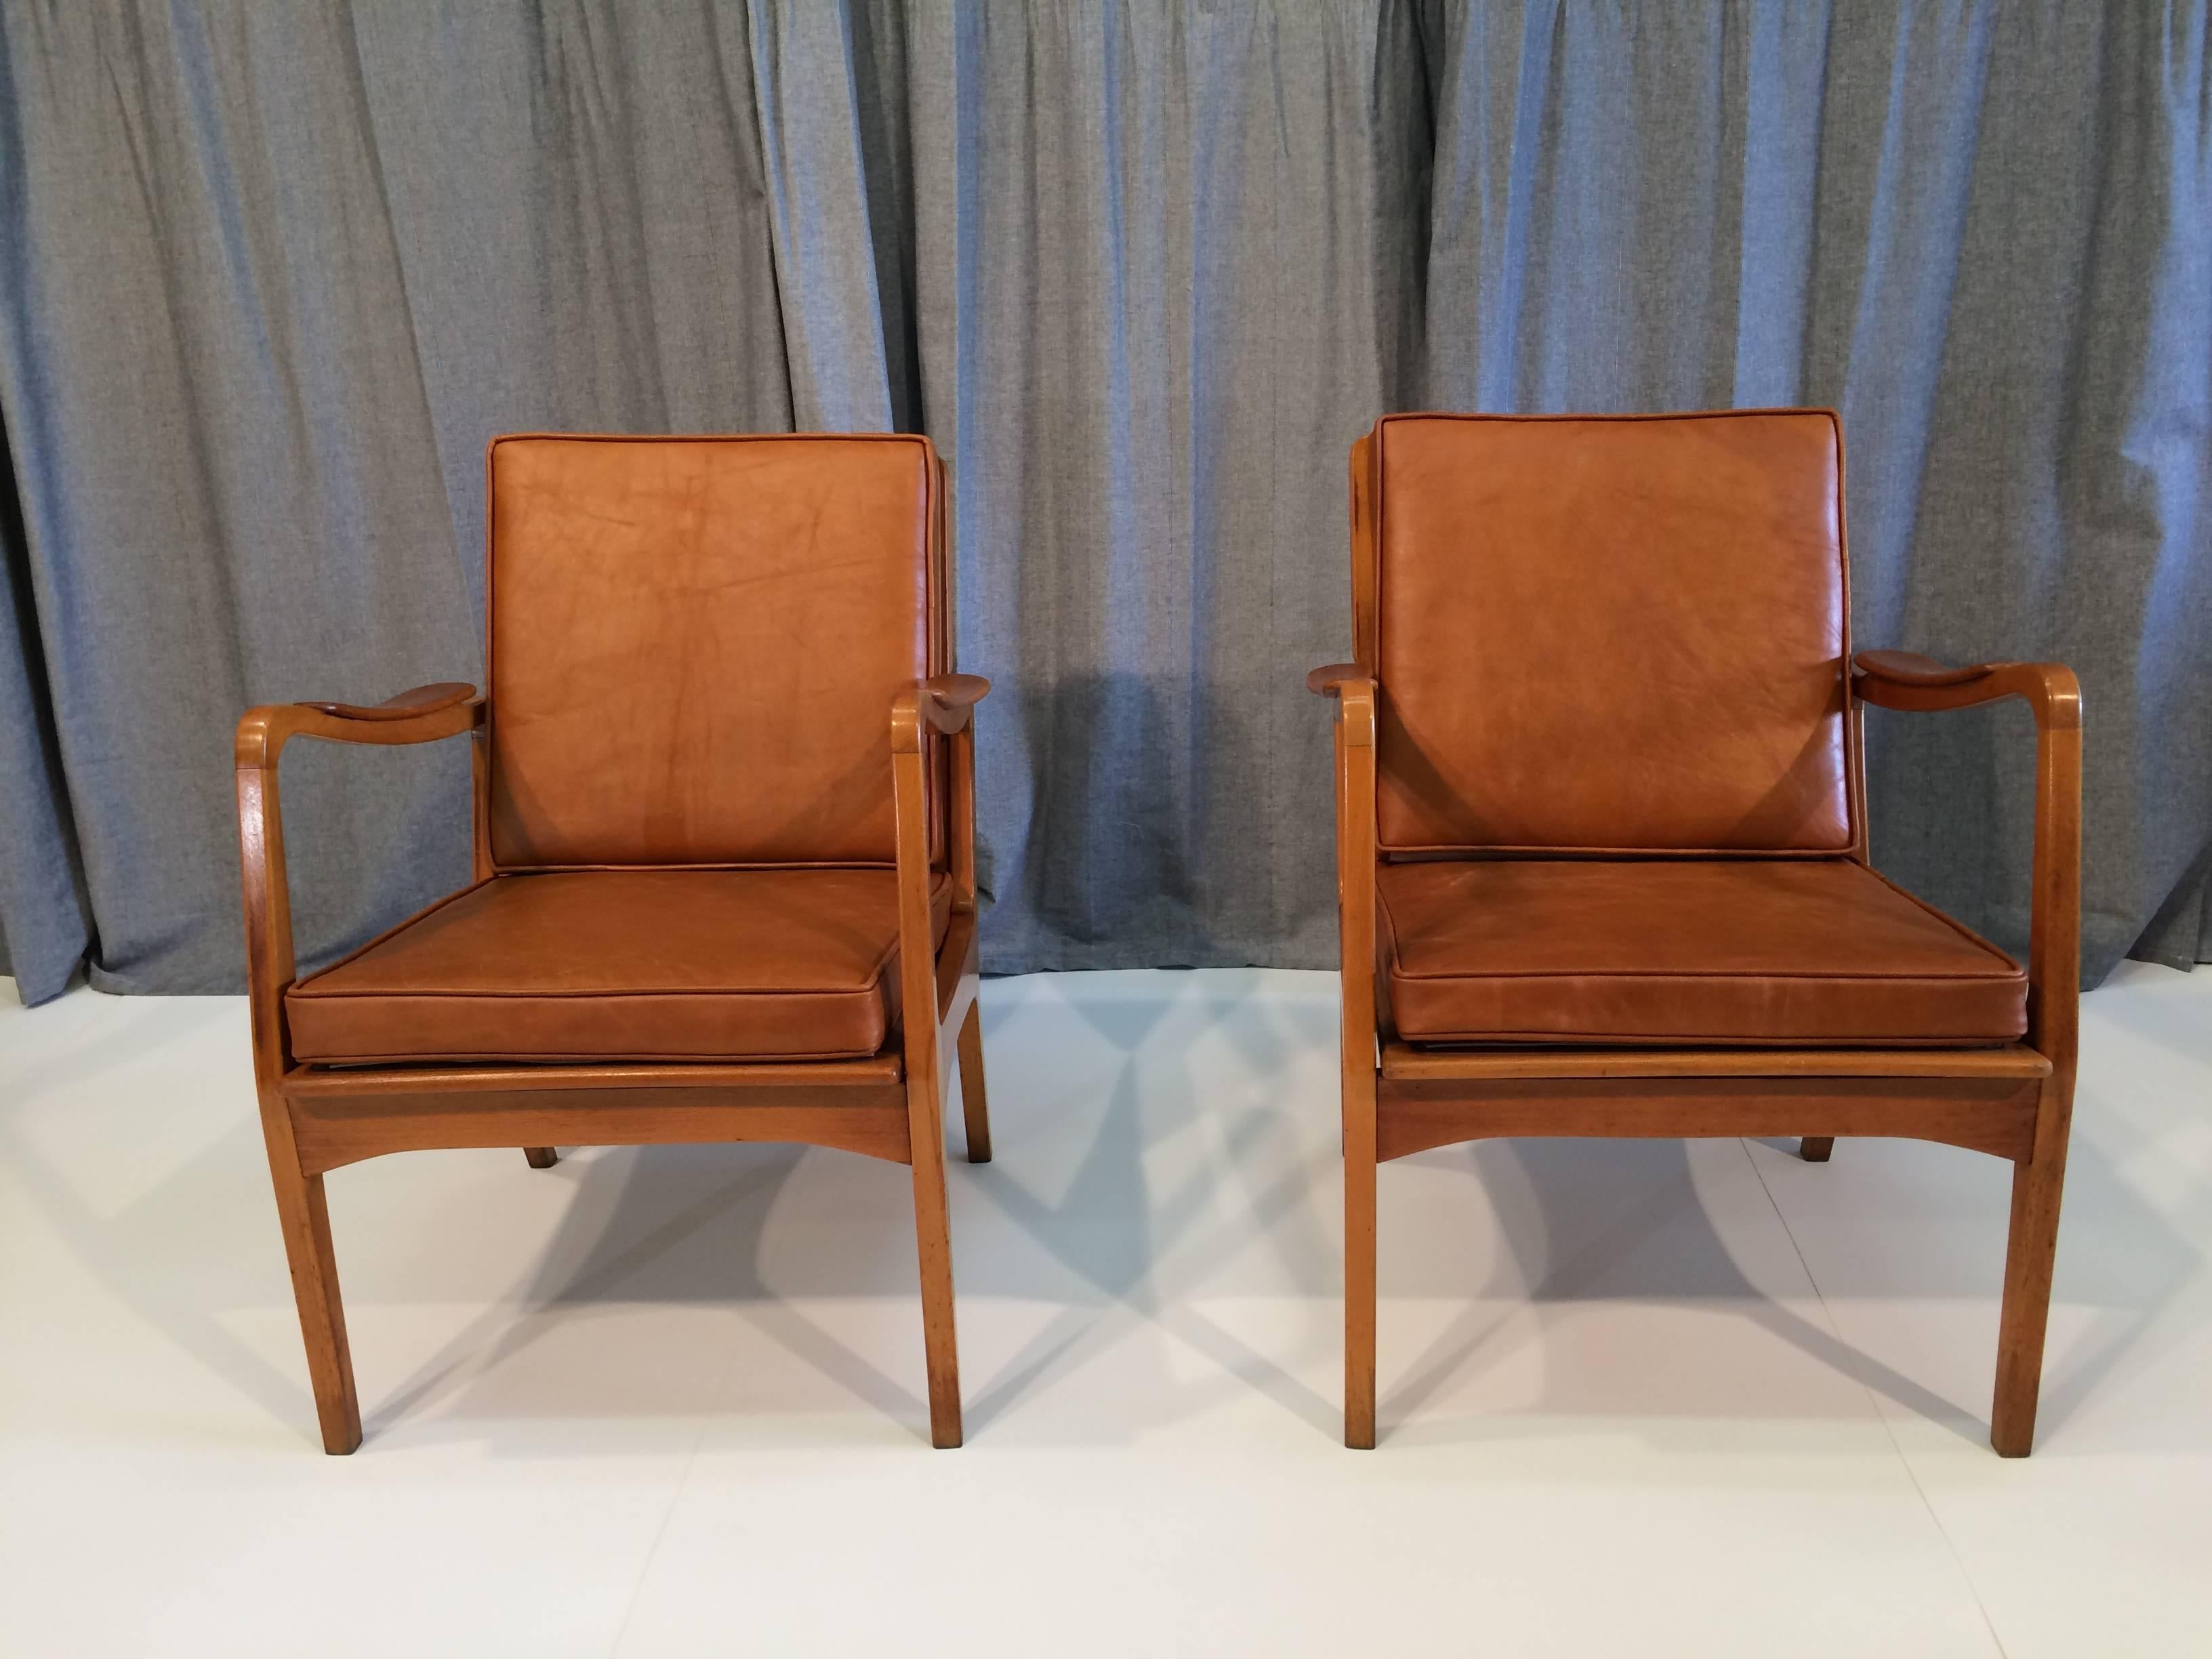 Mid-20th Century Beautiful Pair of Danish Armchairs, Denmark, 1950s Birch and Cognac Leather